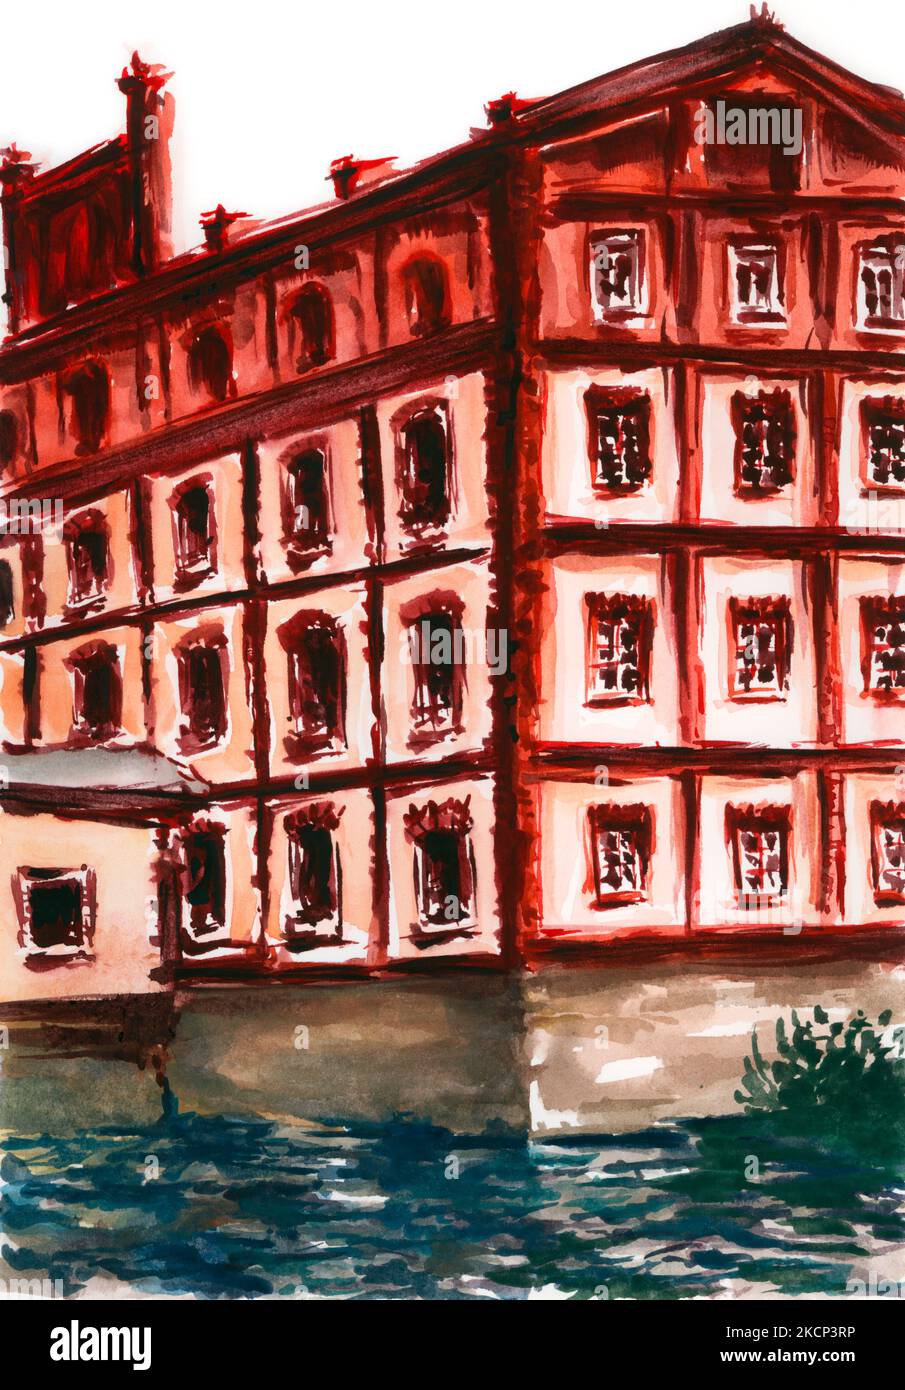 Ancient building over river. Watercolor on paper. Stock Photo